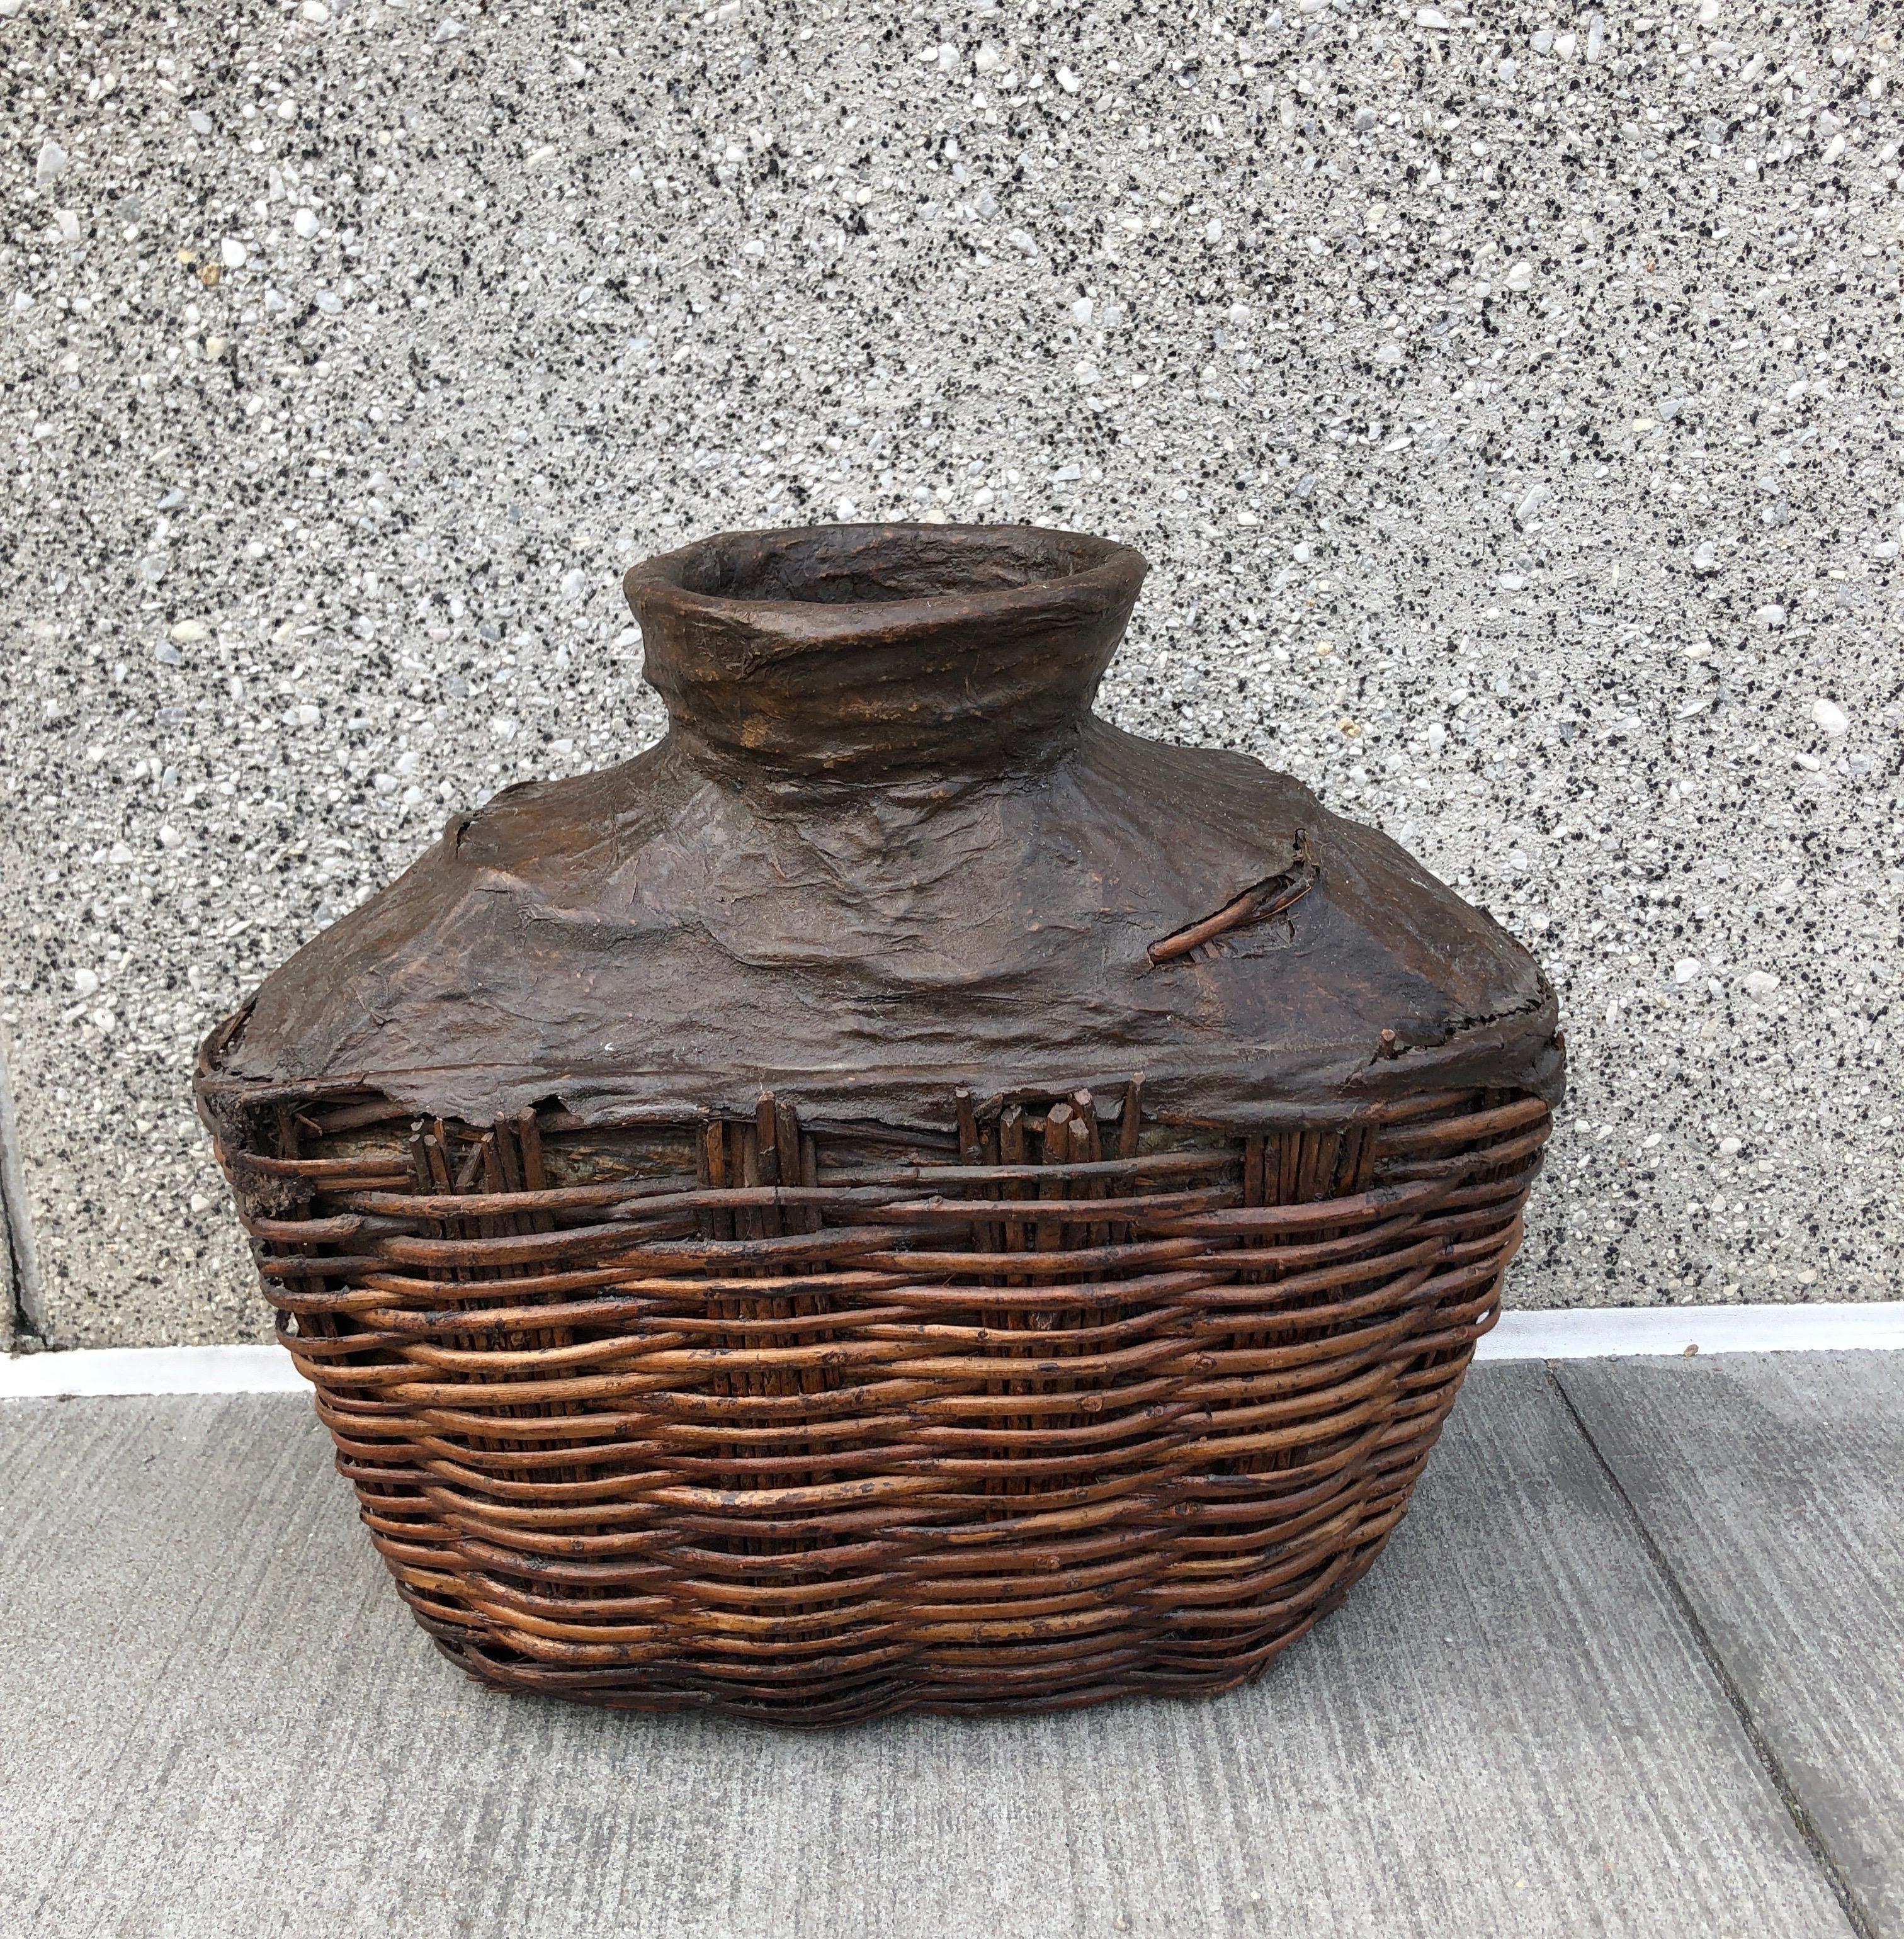 A classically shaped, hand woven antique willow food oil container from China, Shanxi Province, c. 1900.